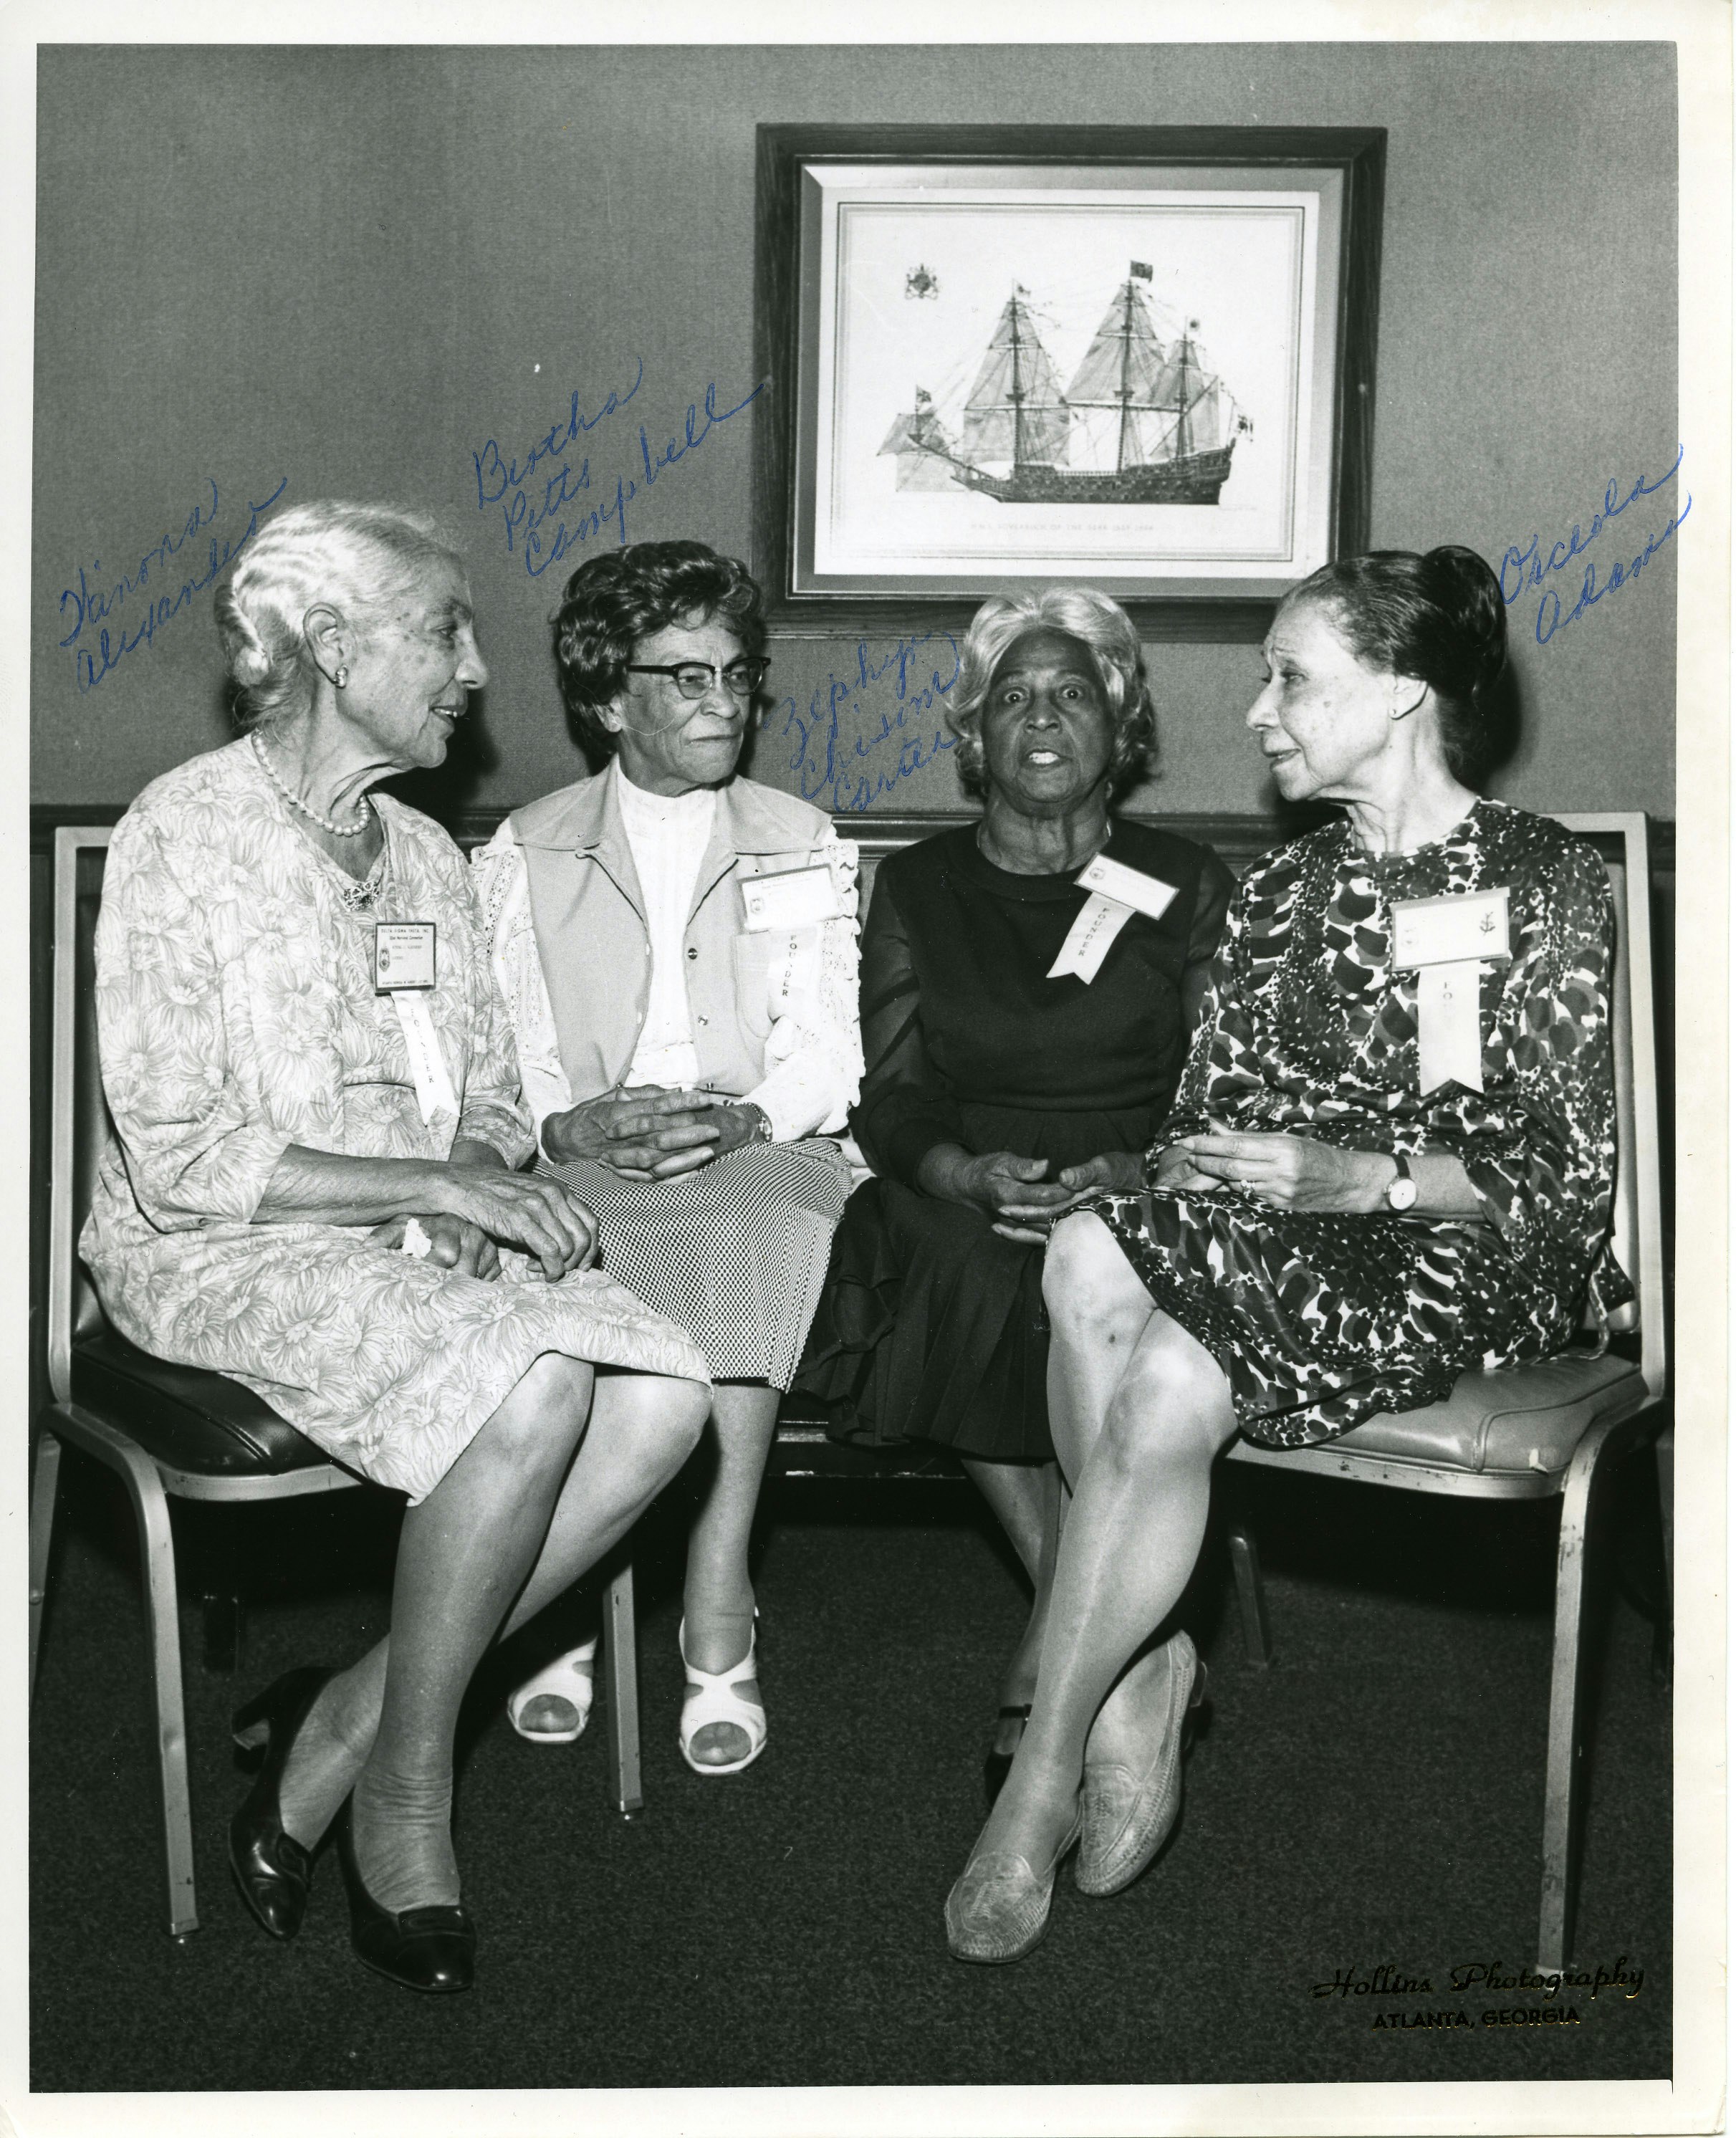 Group portrait of four Delta Sigma Theta members, Winona Alexander, Bertha Pitts Campbell, Zephyr Chisom Carter, and Orceola Adams, seated at an unknown event